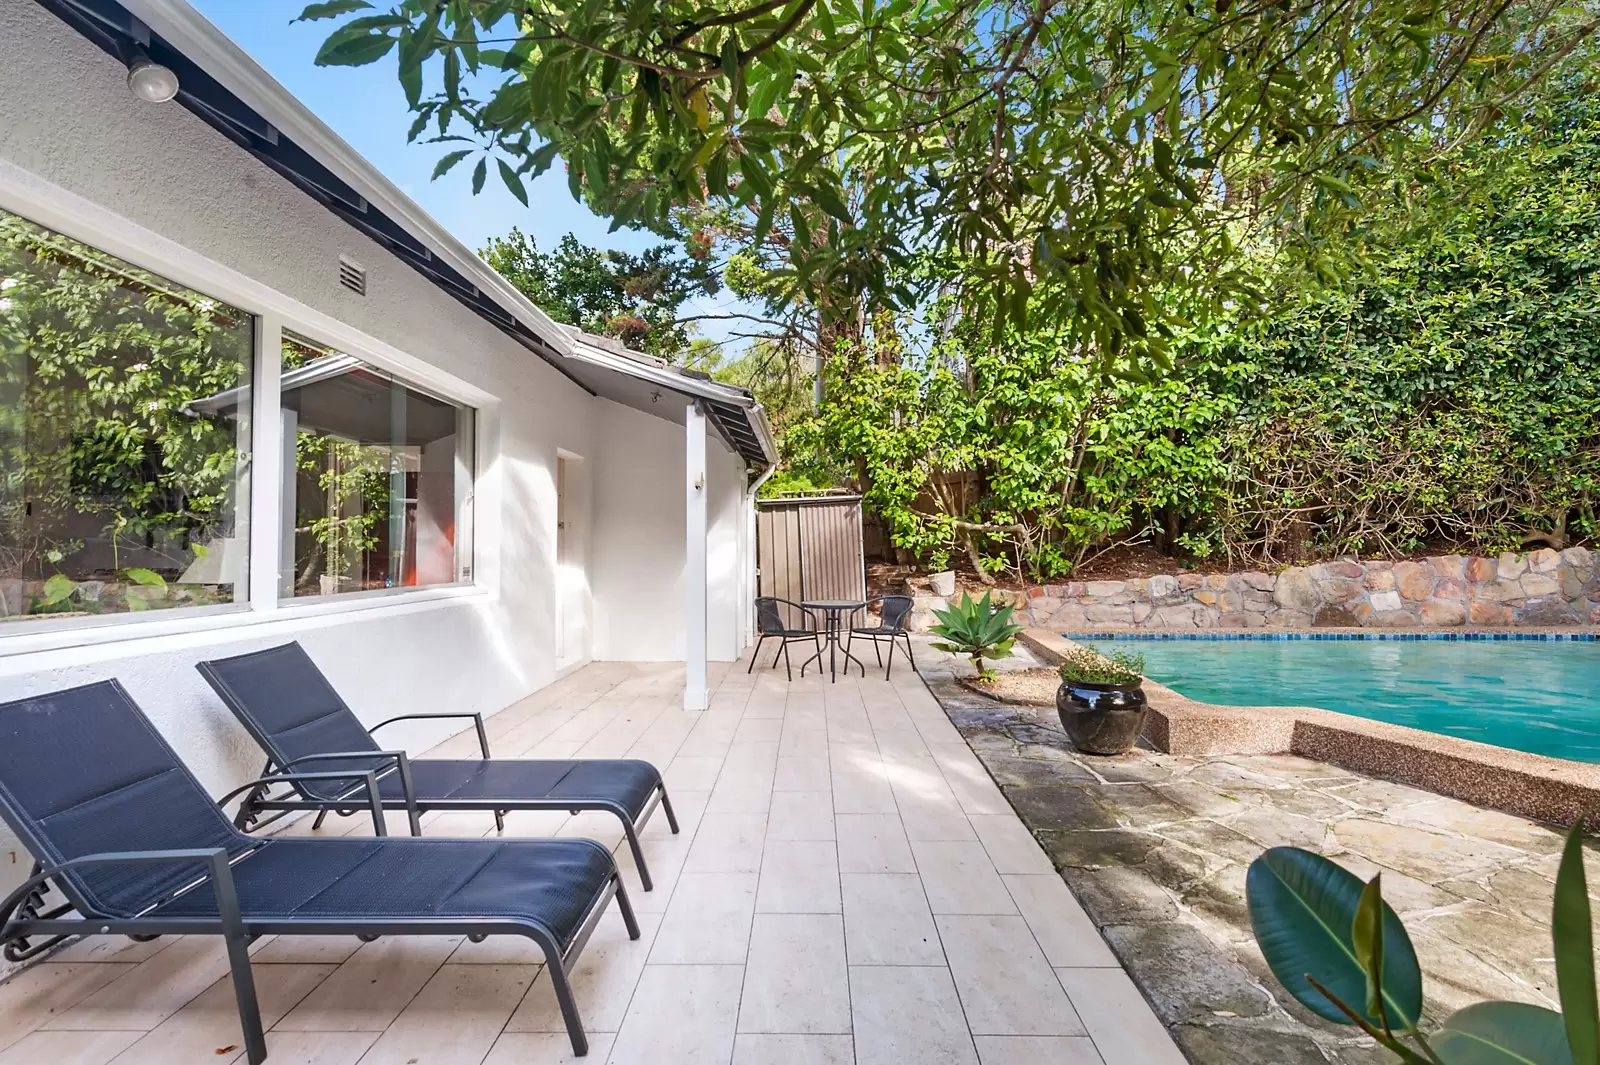 Photo #10: 8 Girilang Avenue, Vaucluse - Sold by Sydney Sotheby's International Realty